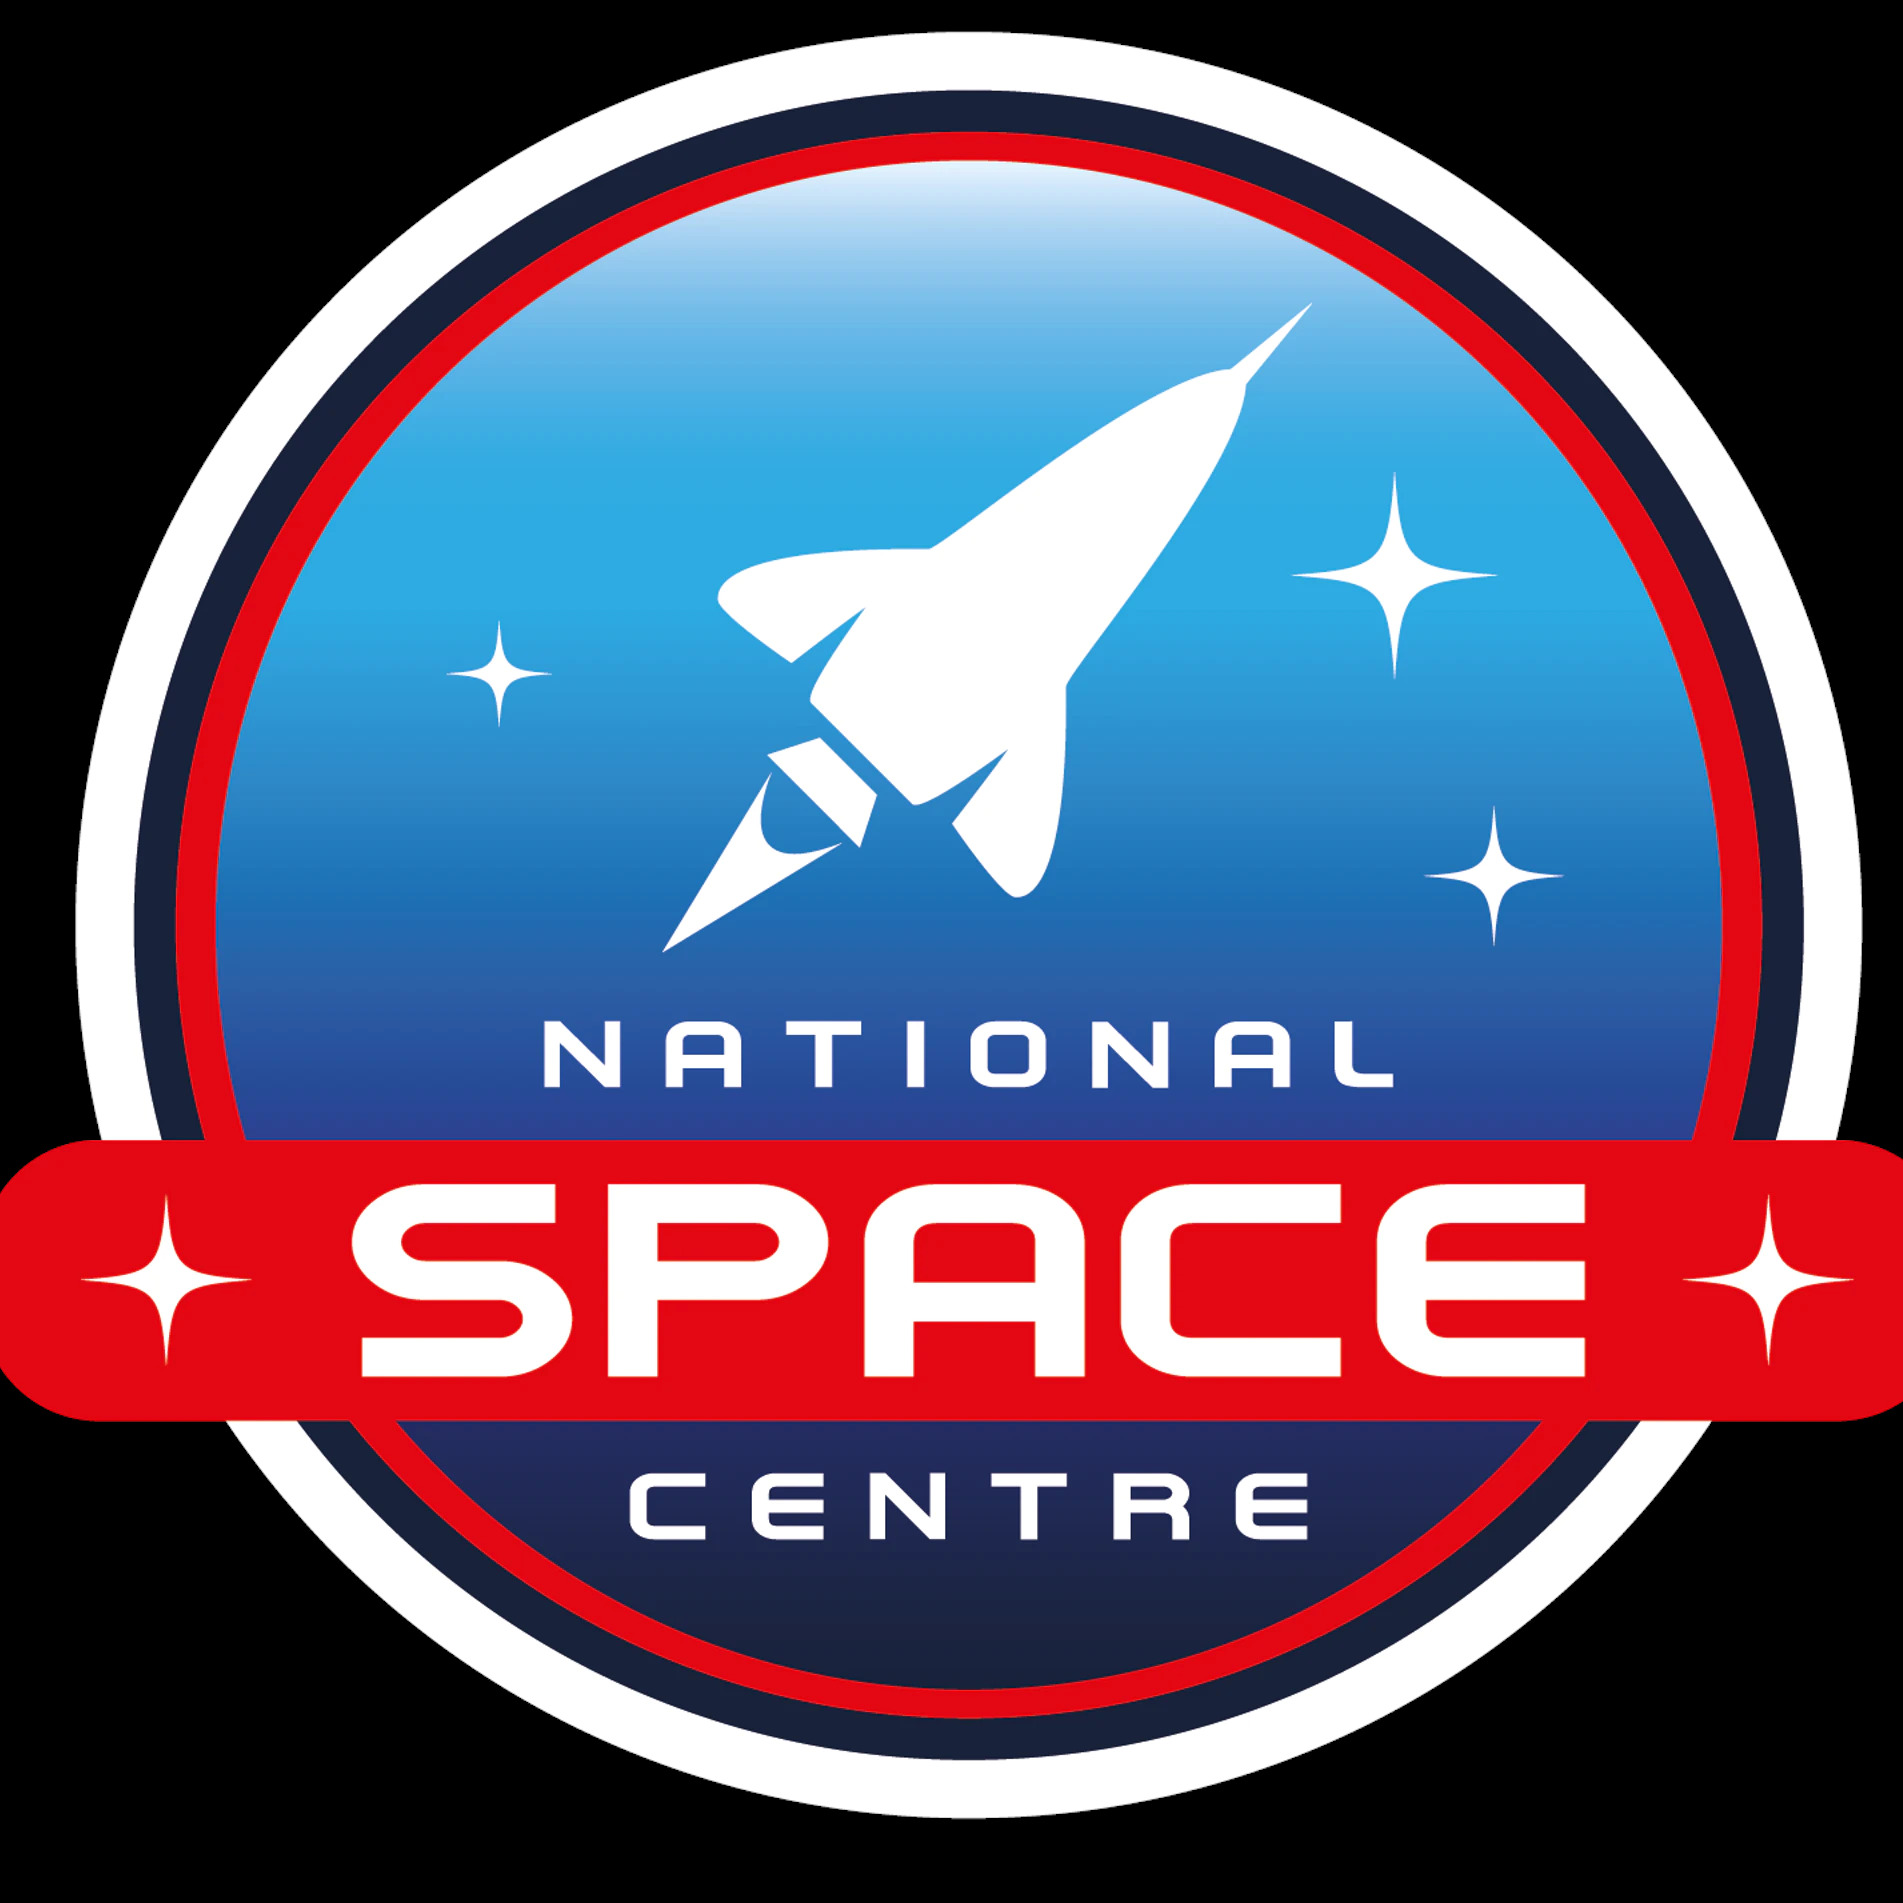 The national space center logo